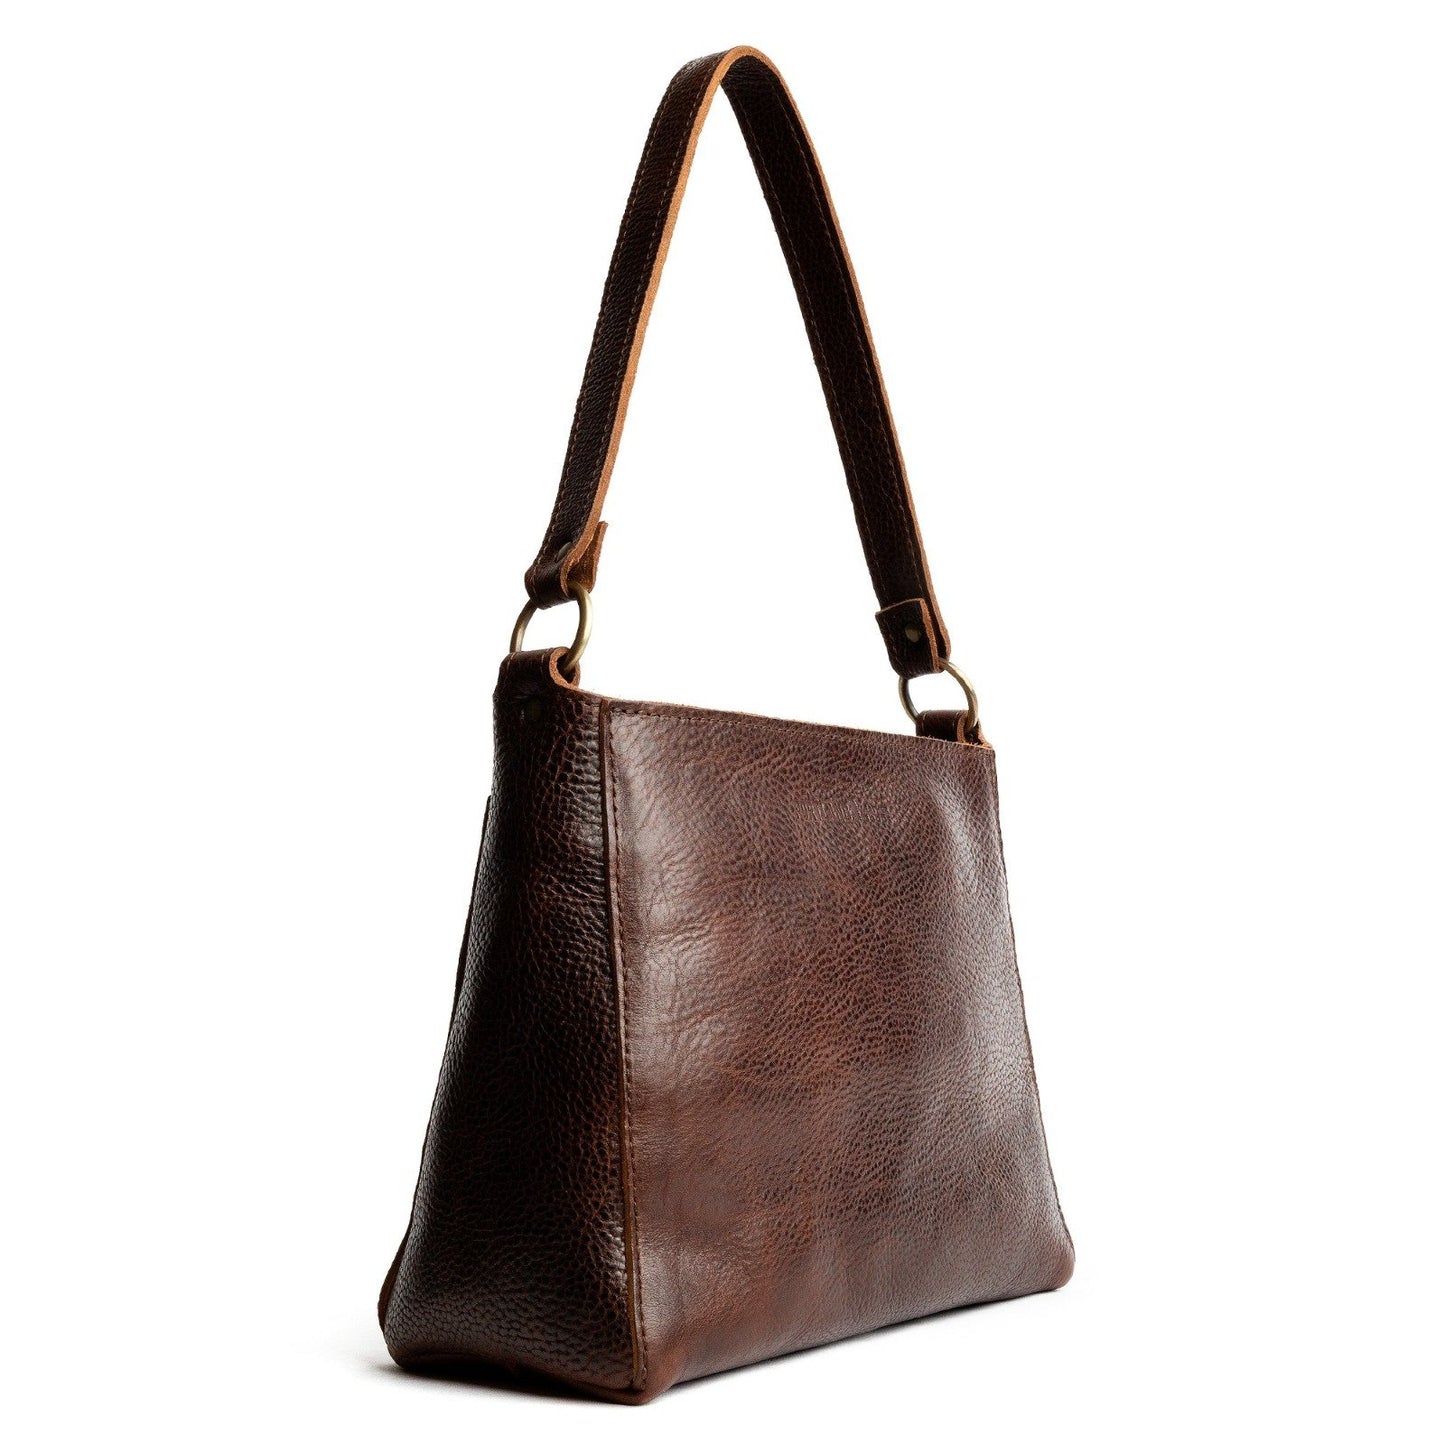 Almost Perfect' Tote Backpack, Nutmeg